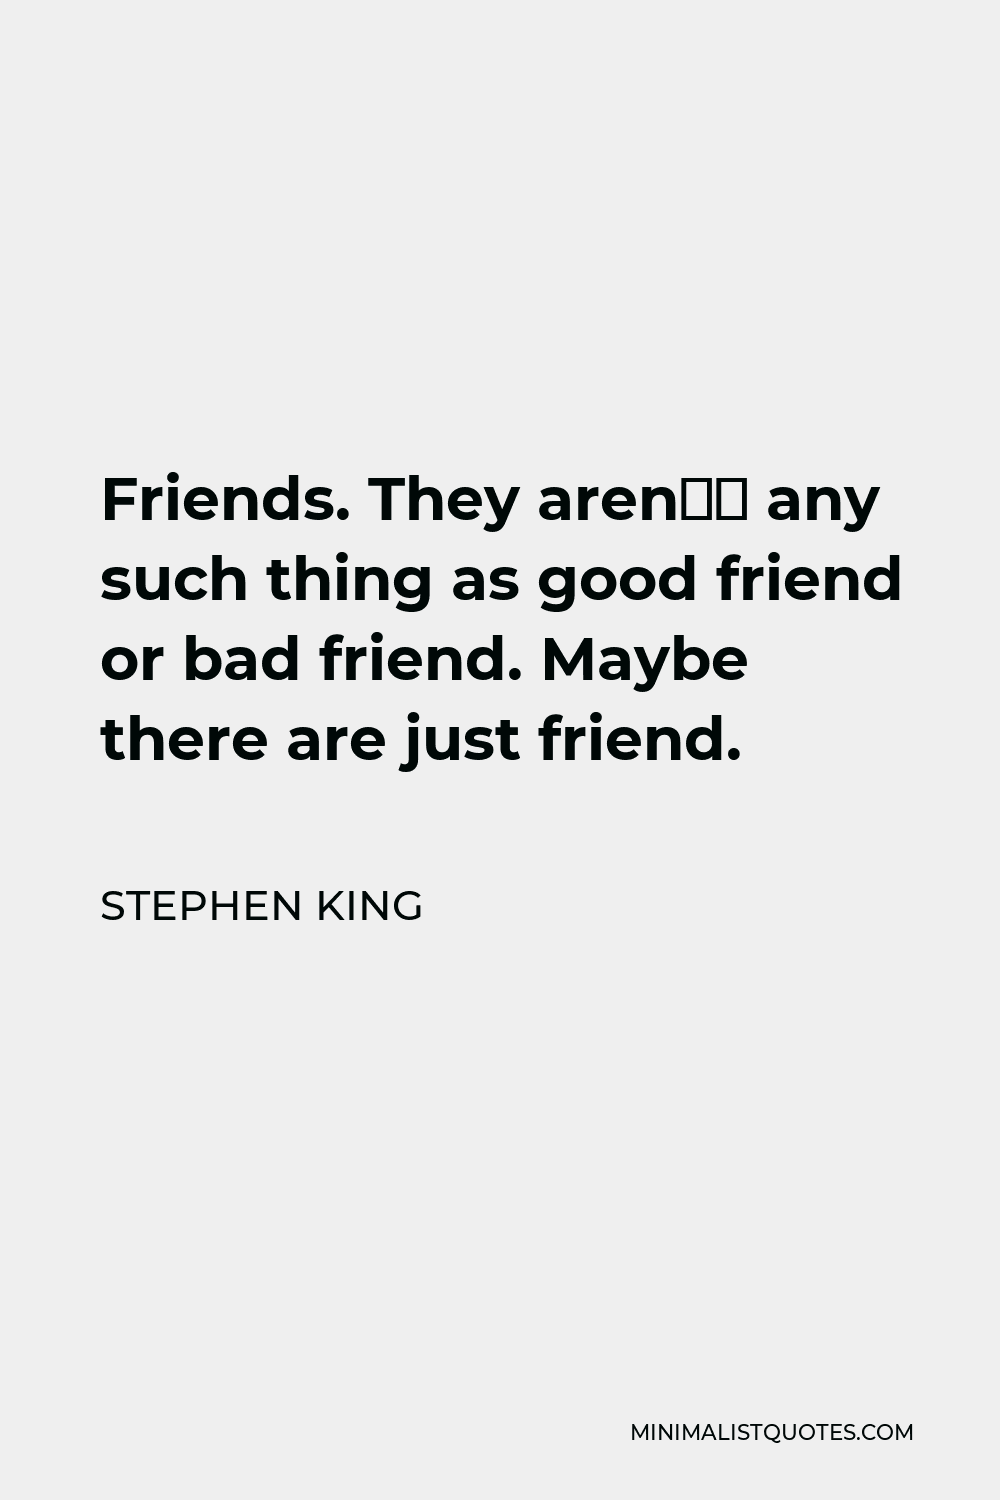 Stephen King Quote - Friends. They aren’t any such thing as good friend or bad friend. Maybe there are just friend.